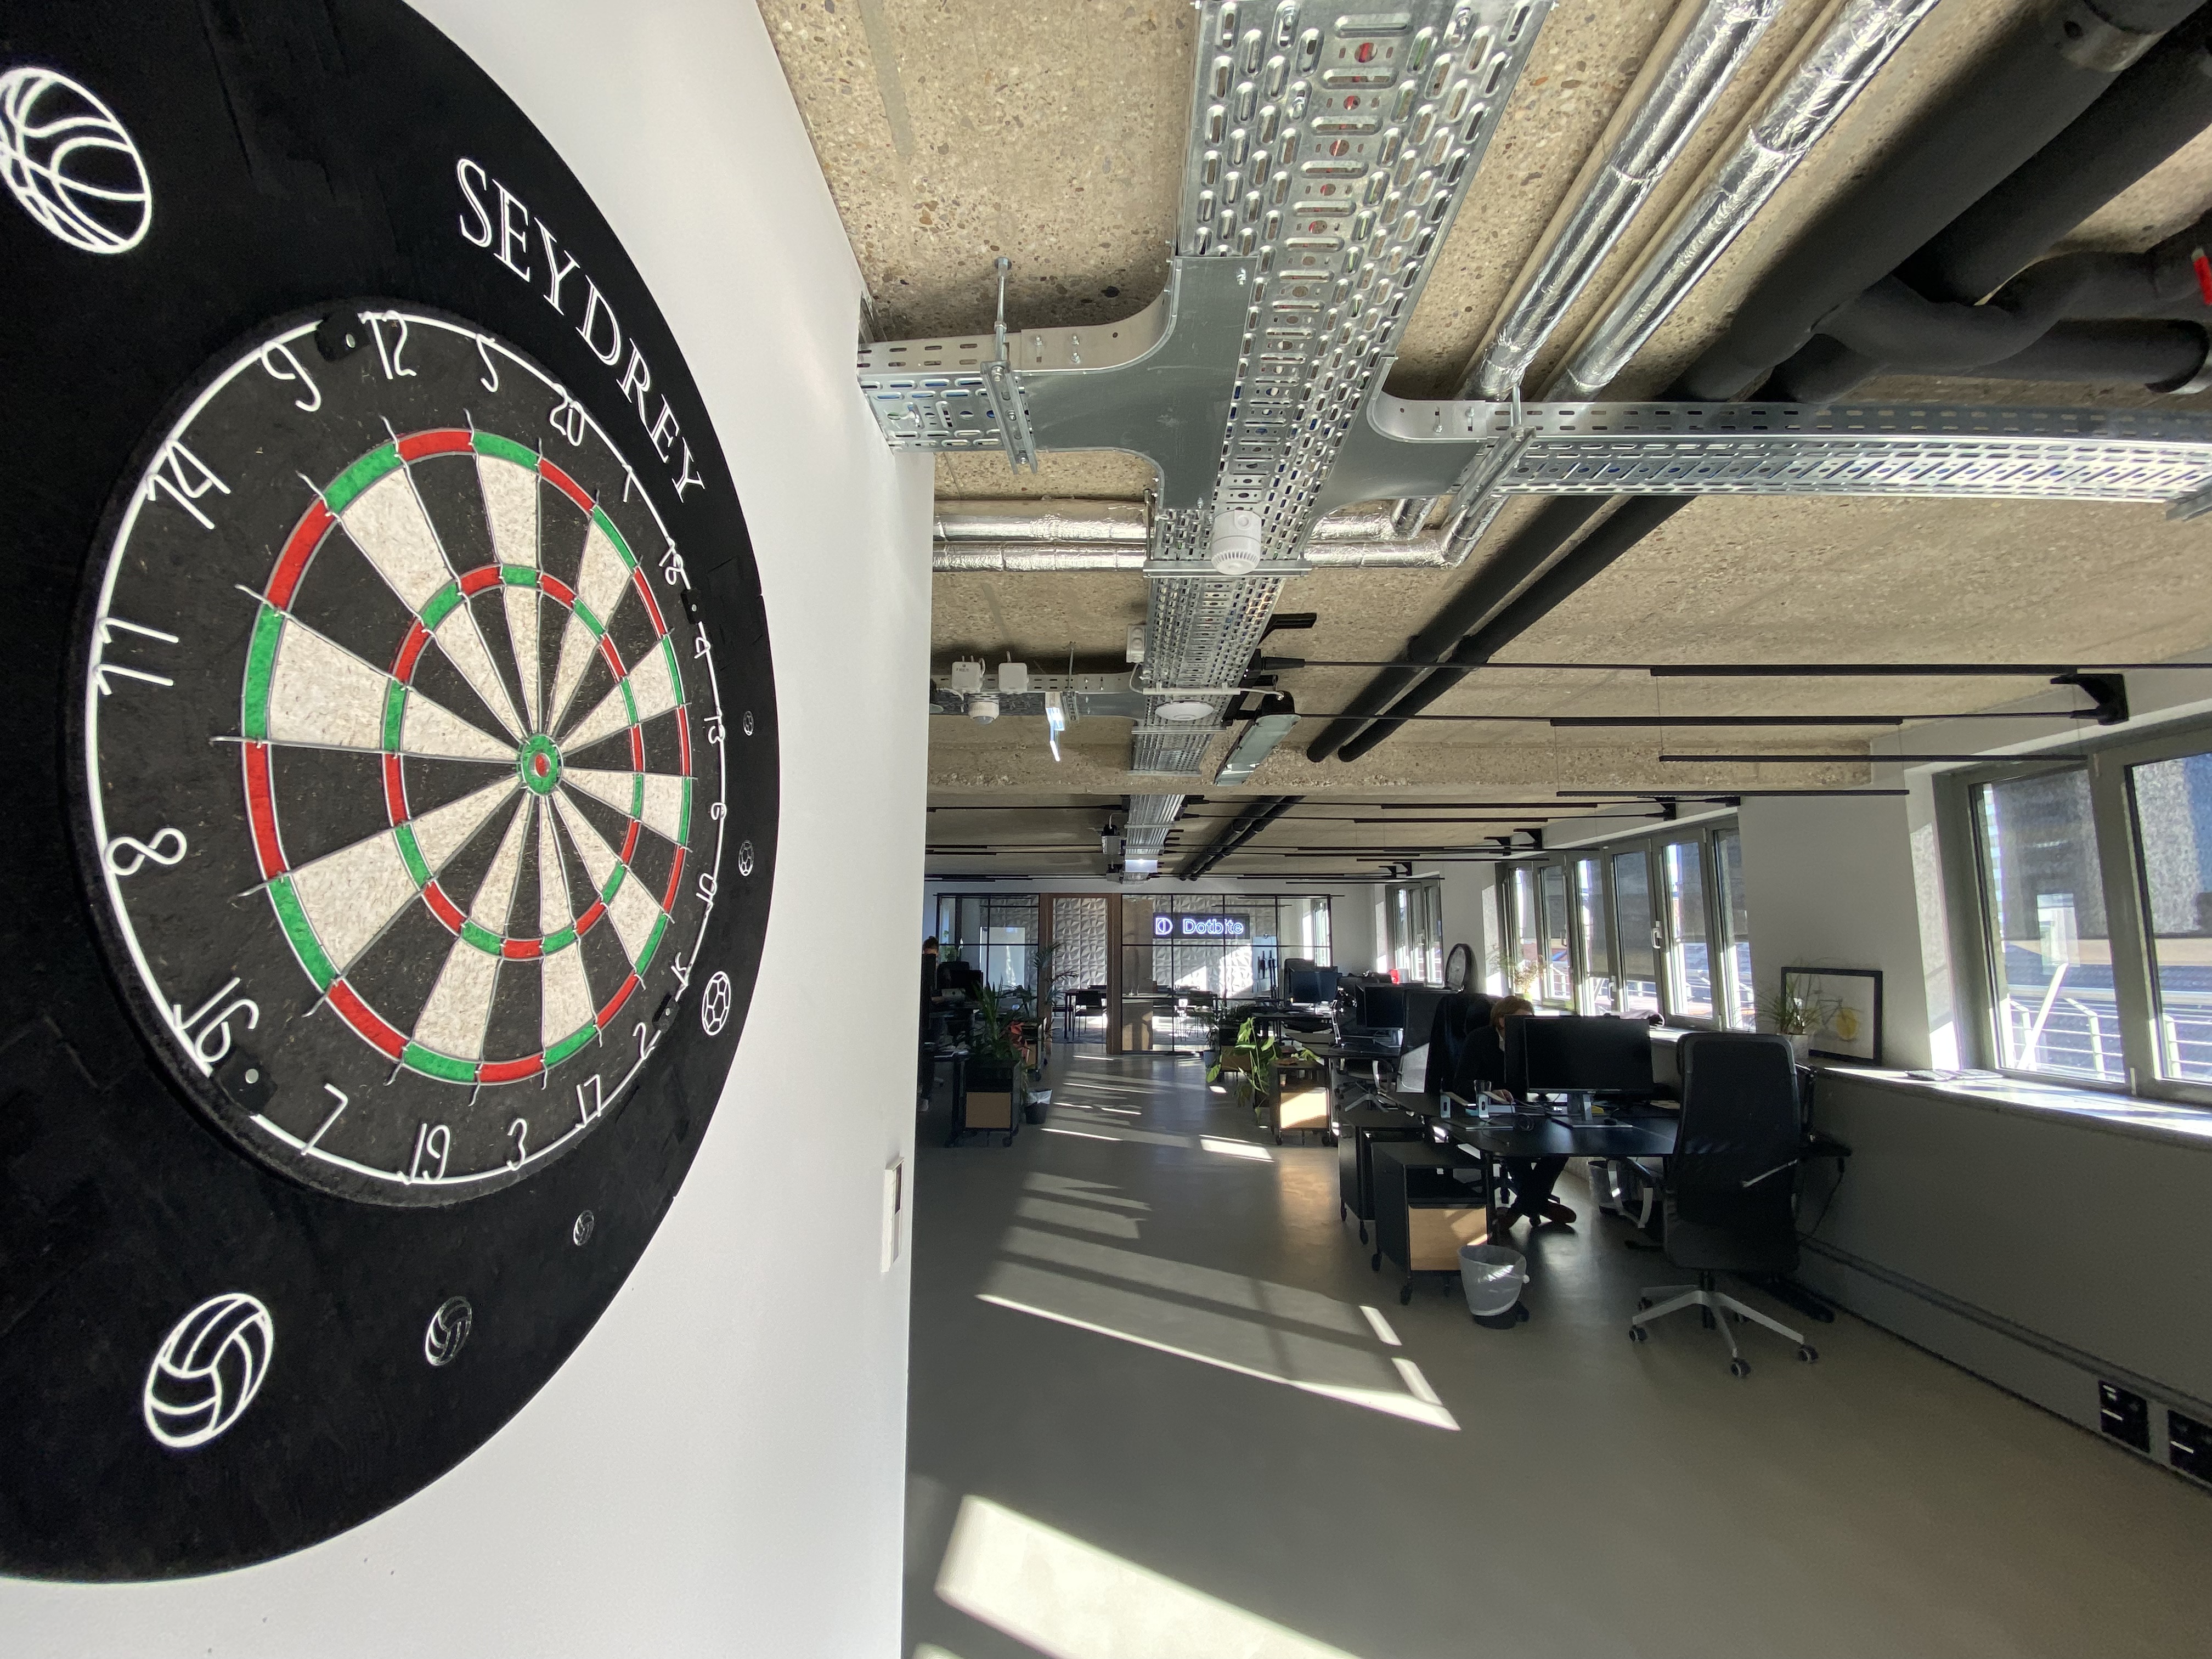 darts board in our office